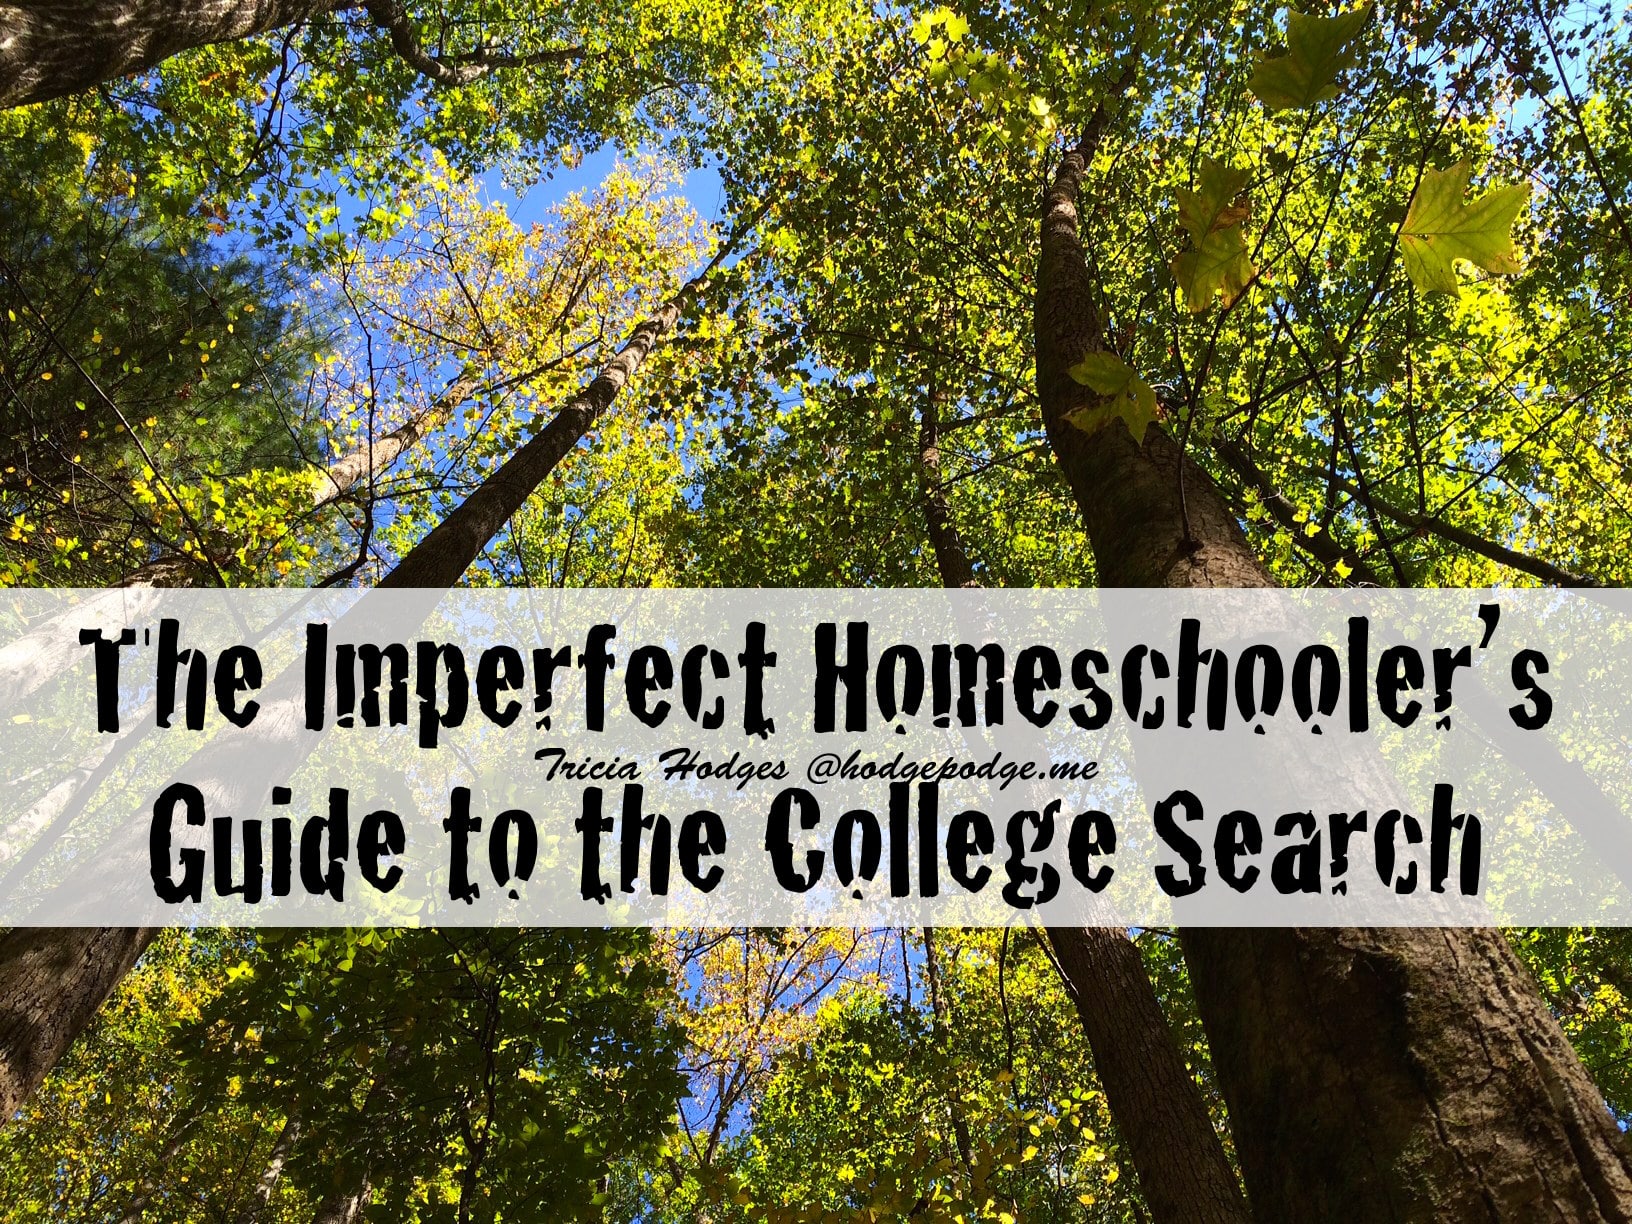 The Imperfect Homeschooler’s Simple Guide to the College Search